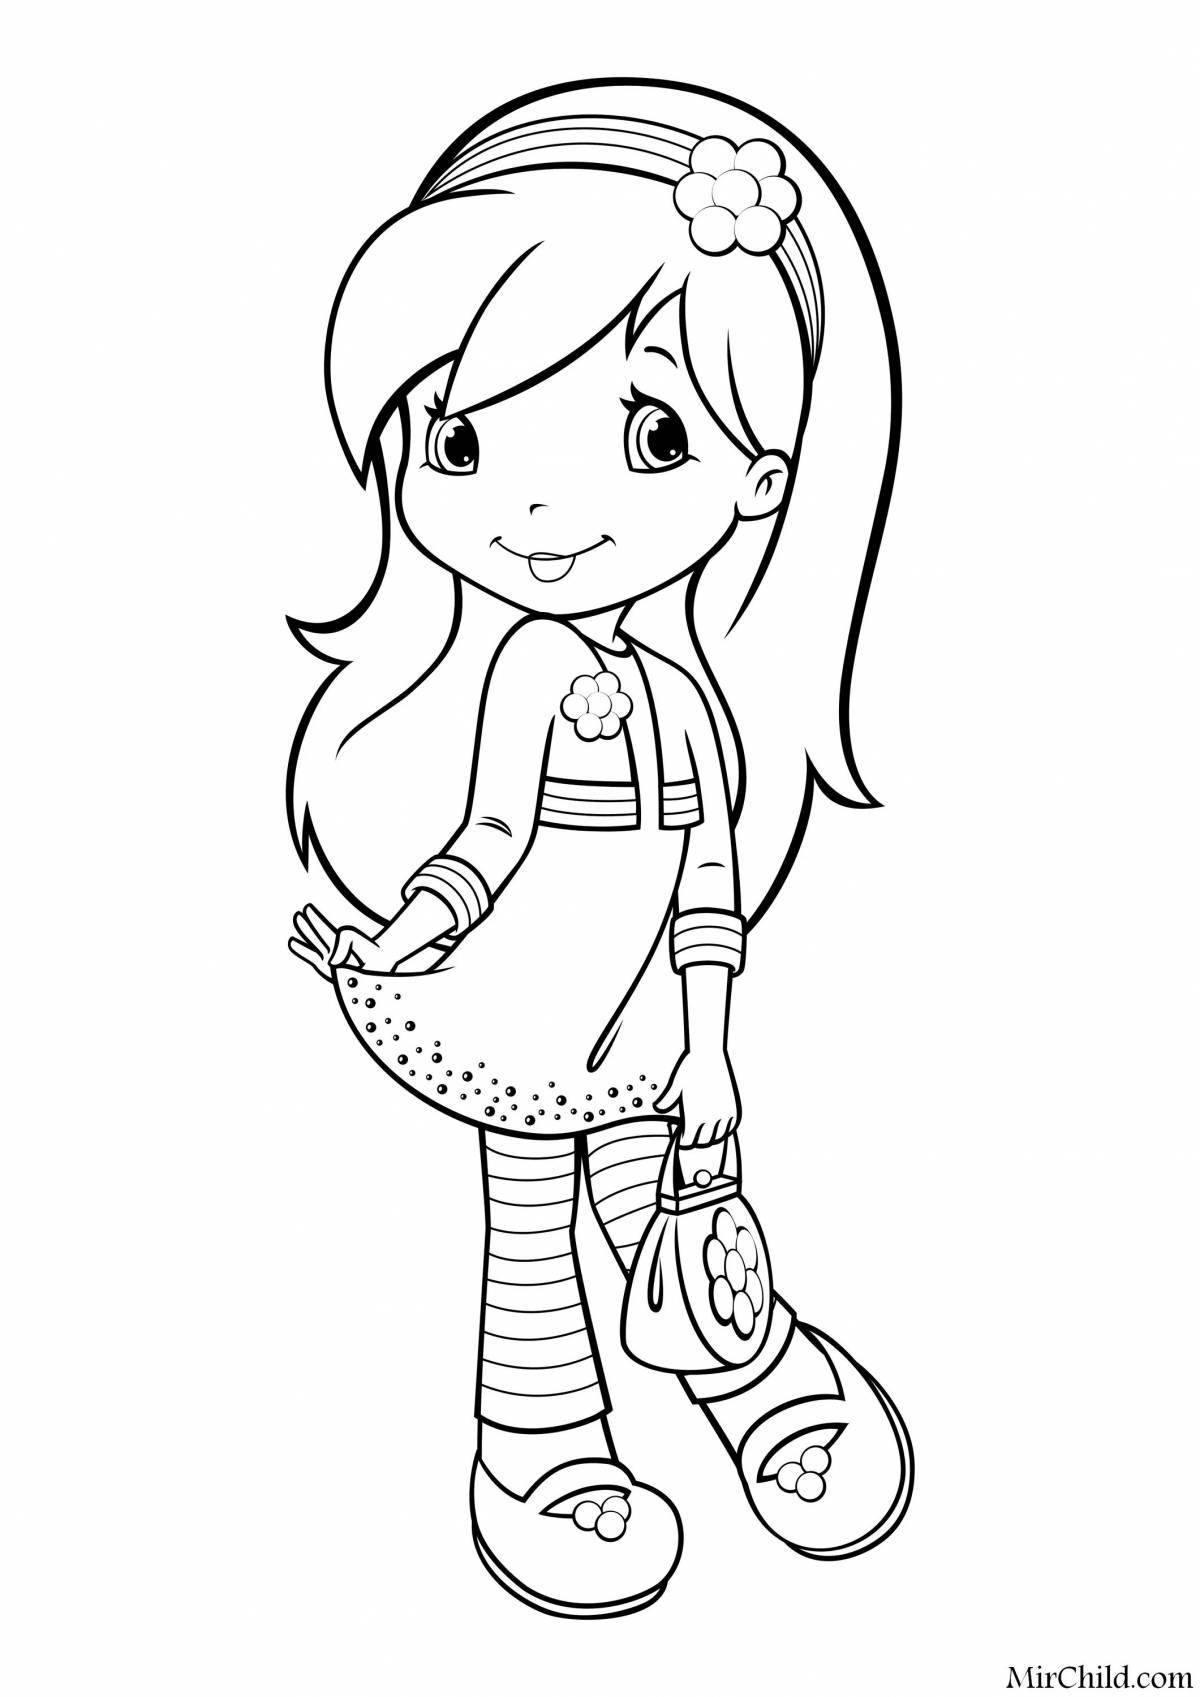 Playtime coloring page girls cartoon